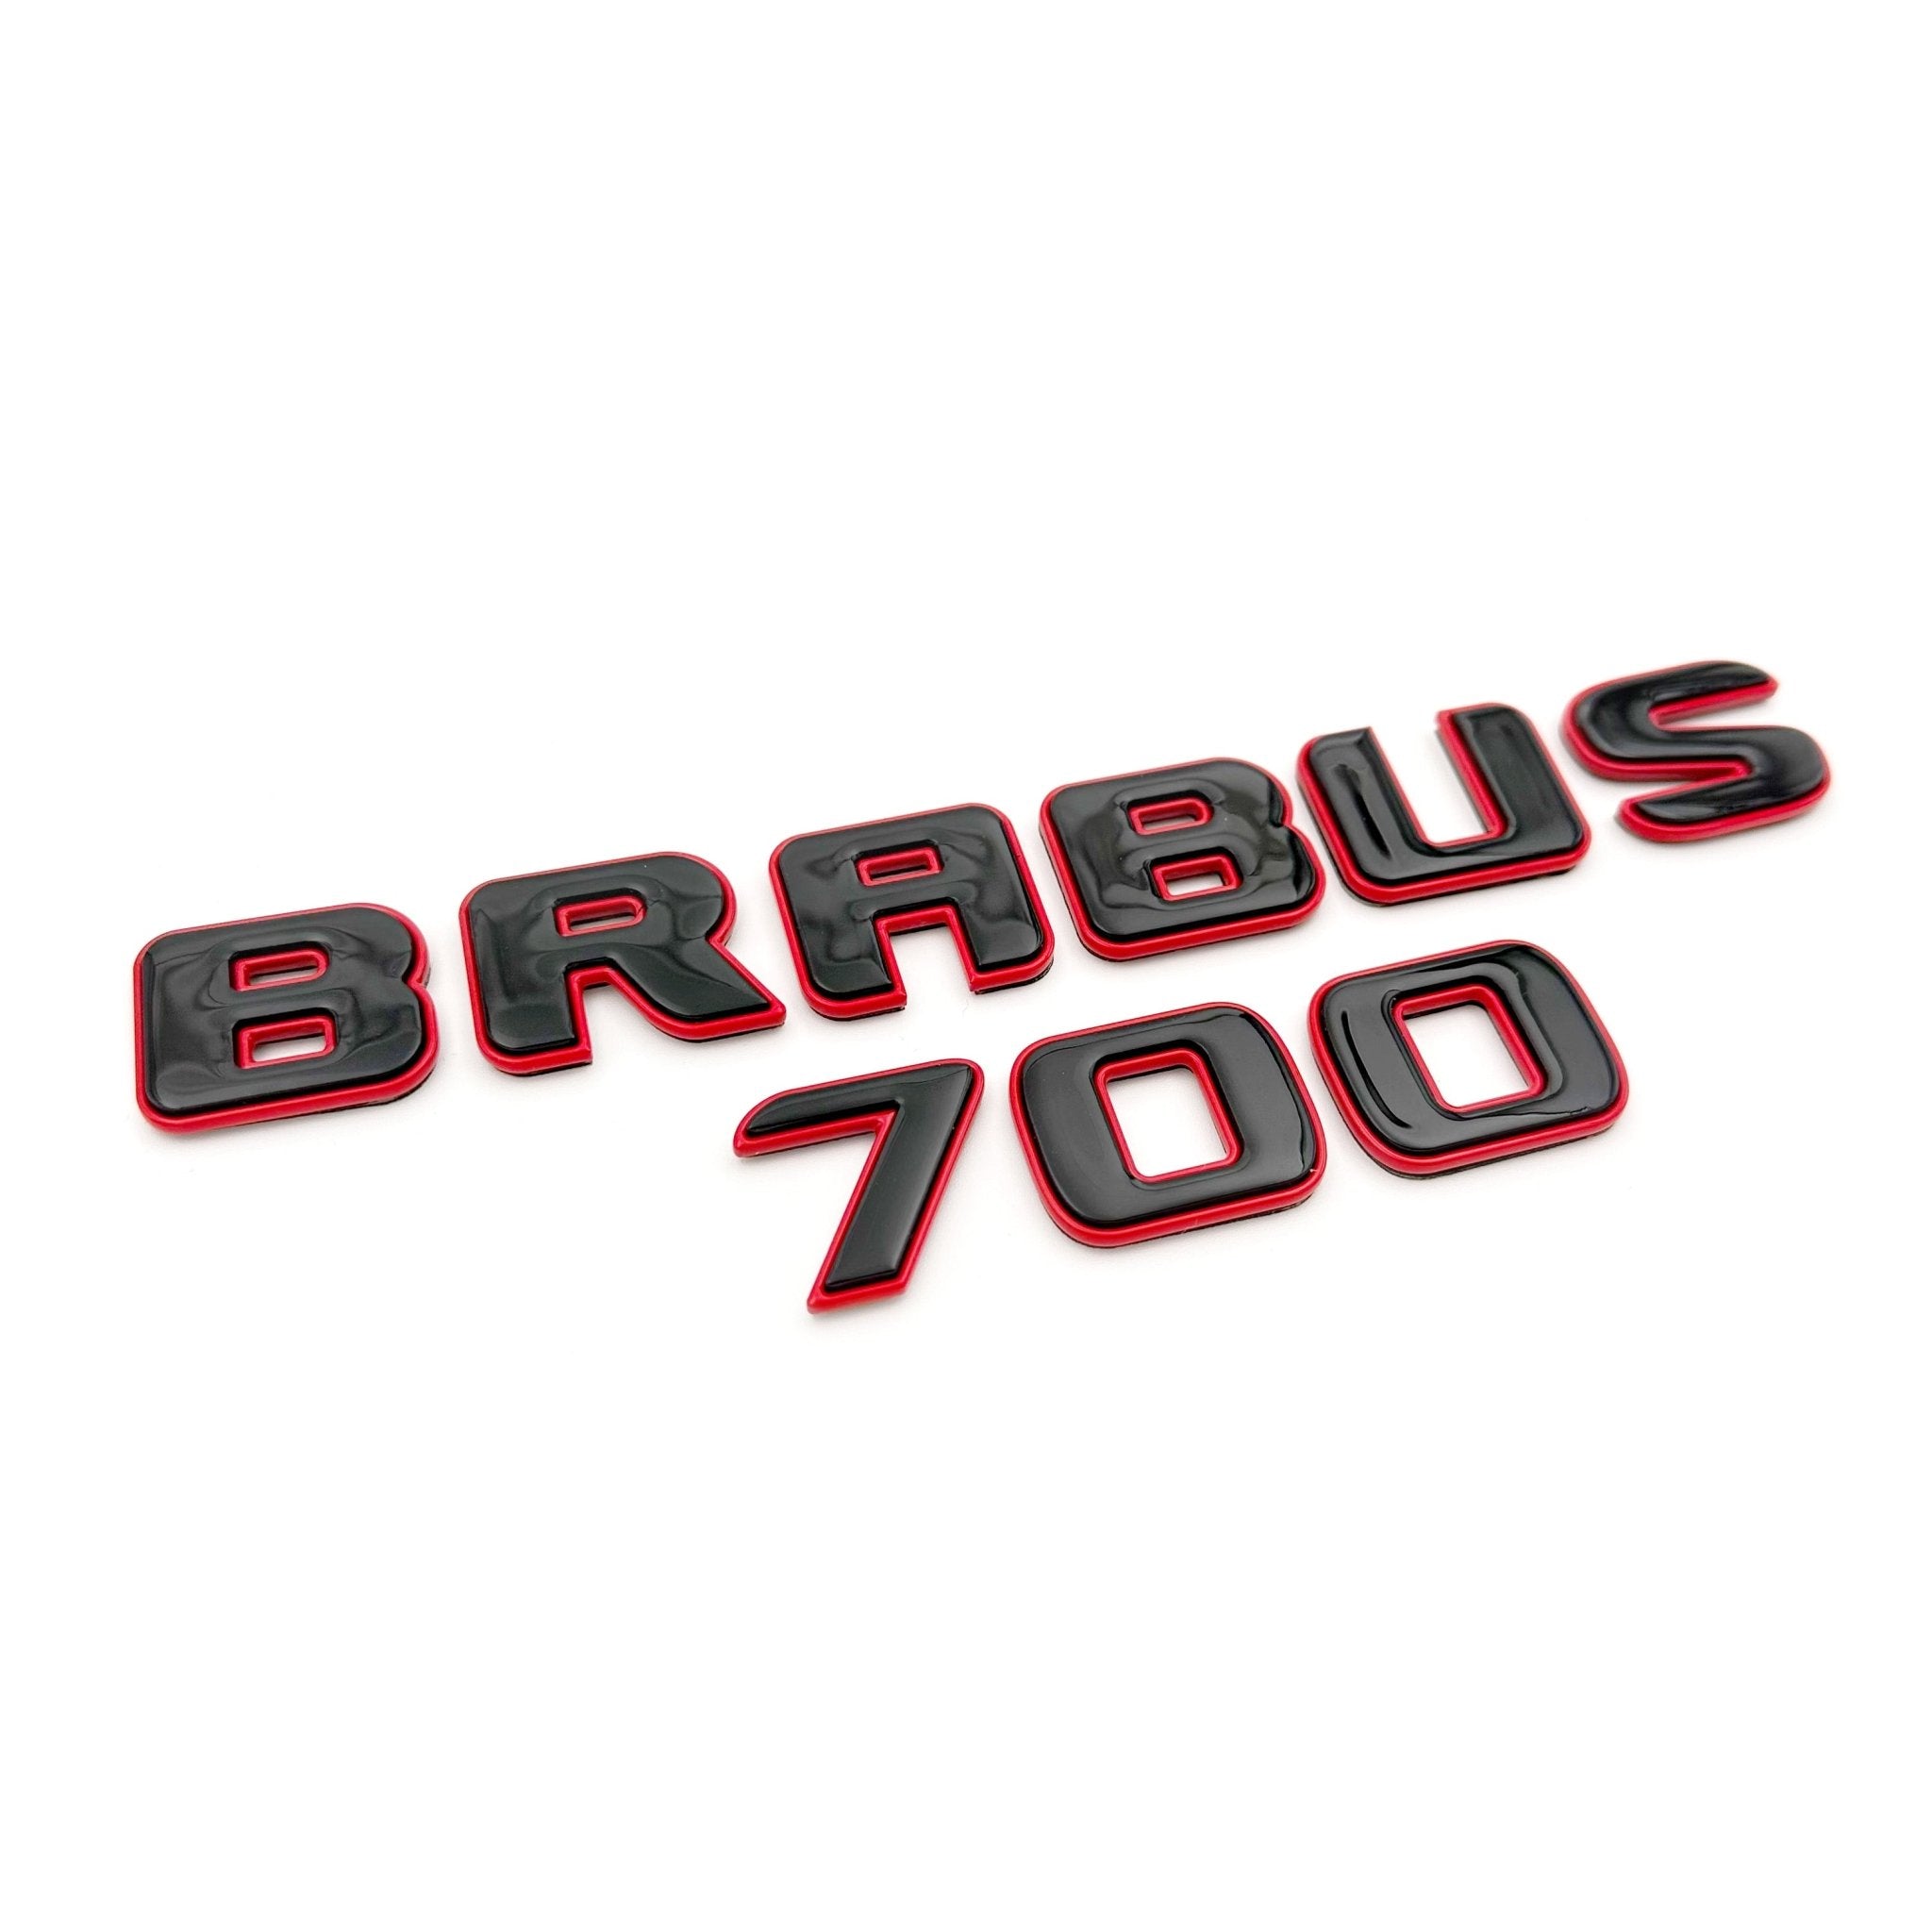 Metallic Brabus 700 style emblems badges for Mercedes-Benz G-Class W463 W463A W464 Black Red Set